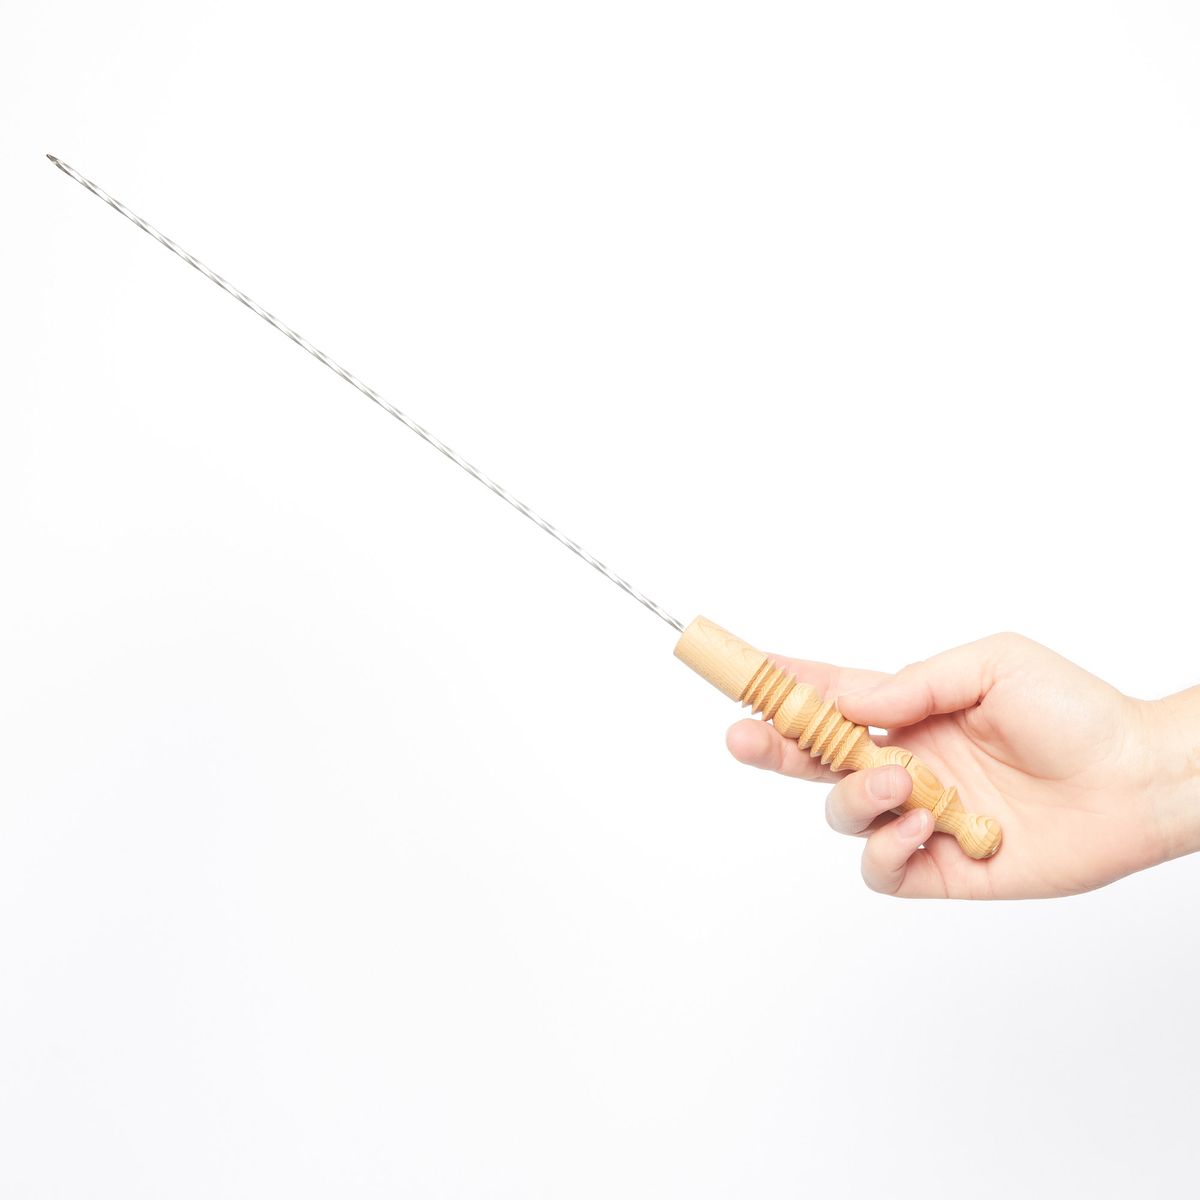 Hand holding a metal skewer with a wooden handle